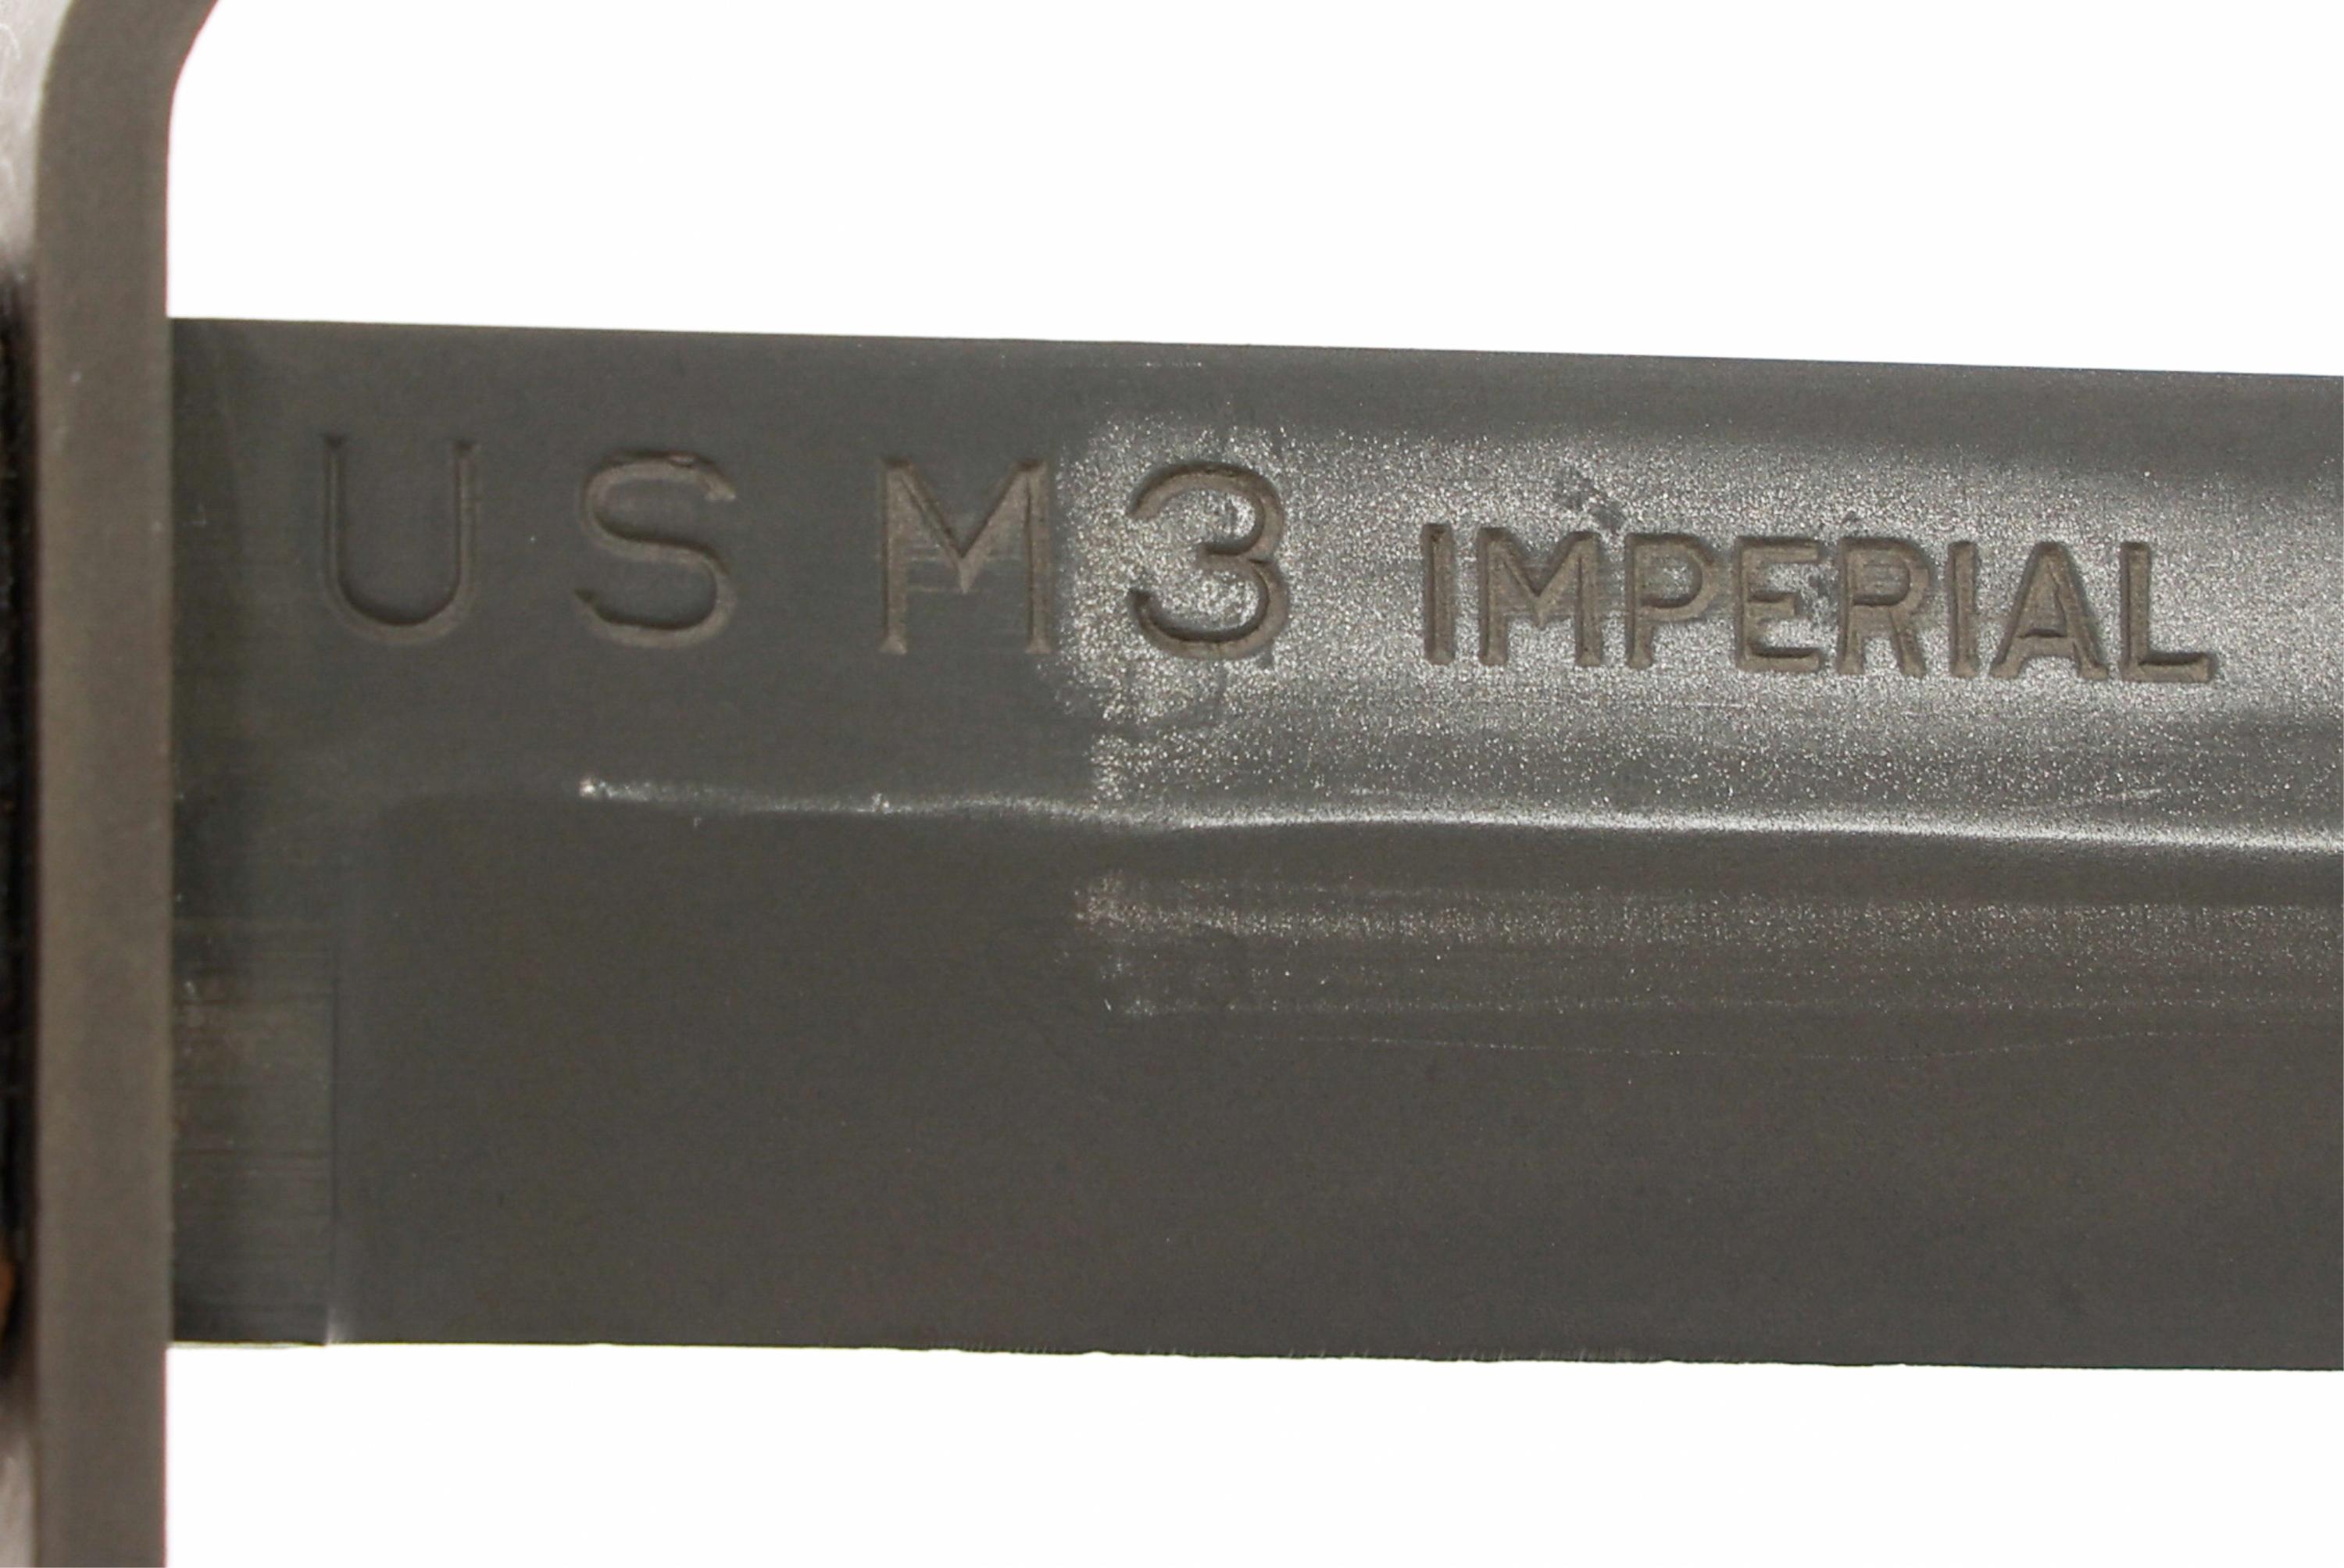 WWII US ARMY M3 FIGHTING KNIFE by IMPERIAL